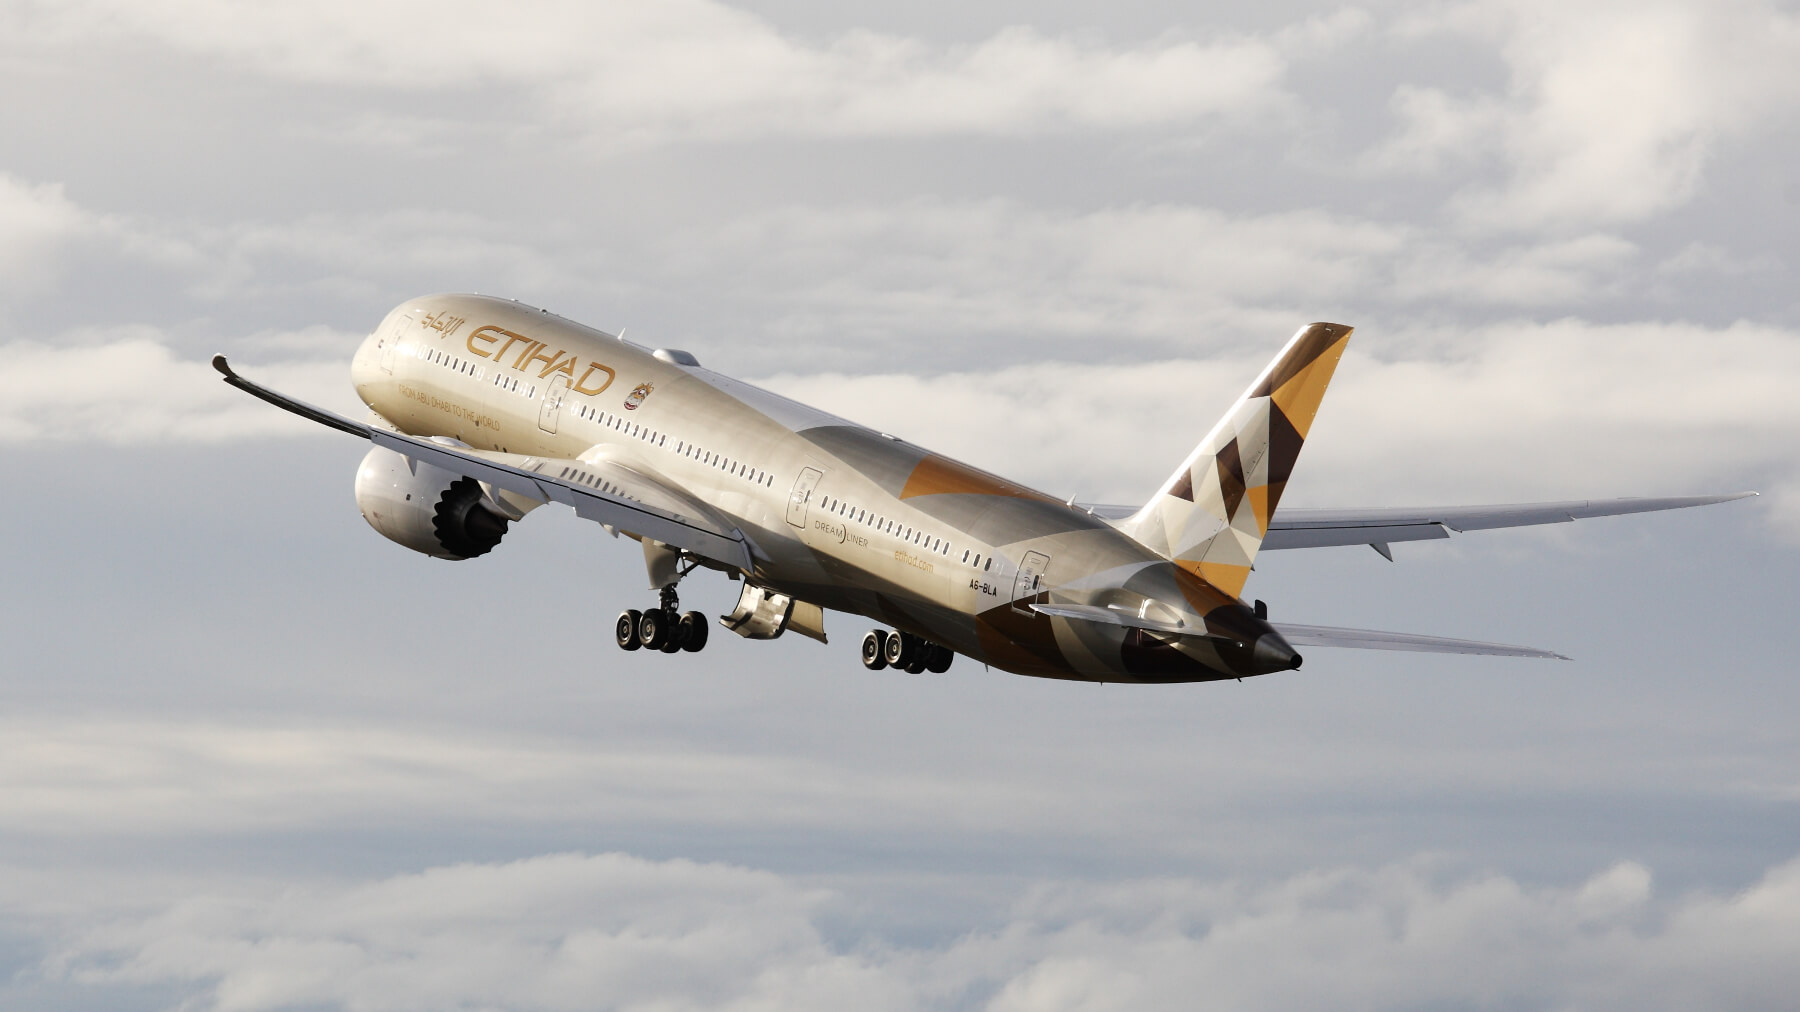 Etihad Airways switches over to Amadeus travel technology for enhanced passenger experience